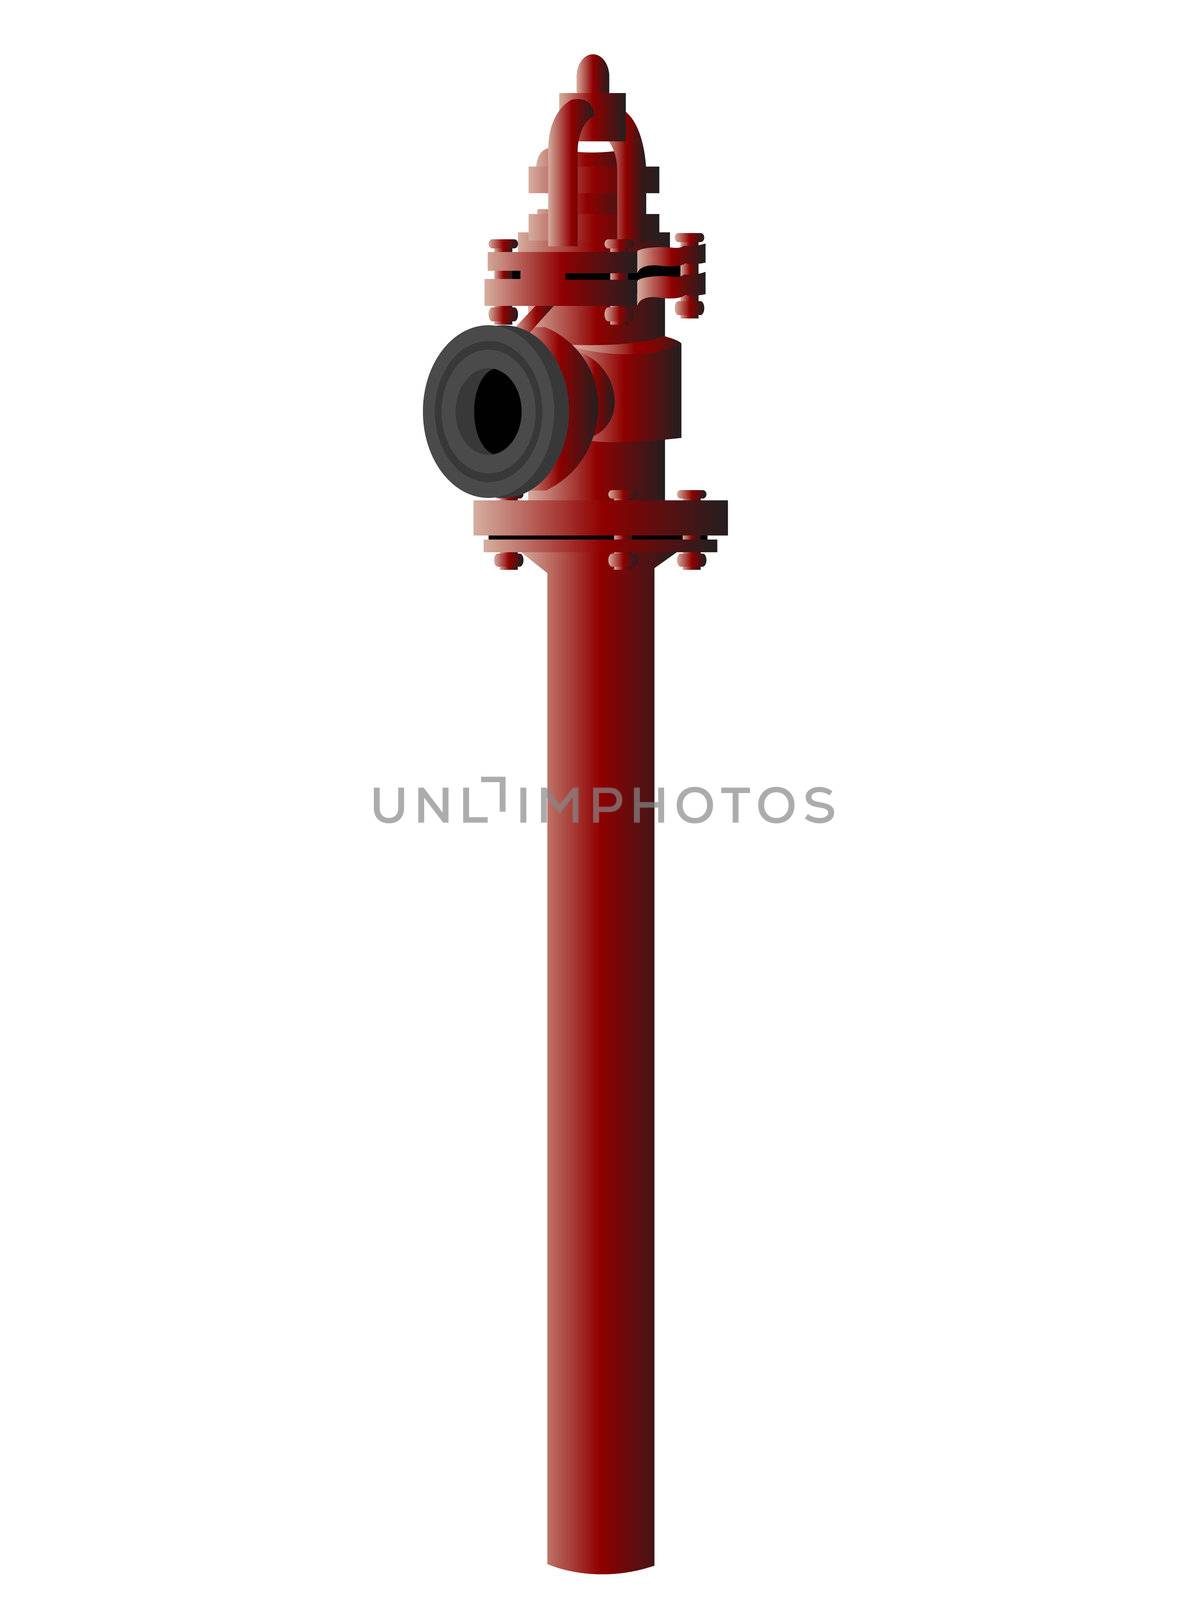 fire hydrant on white background
